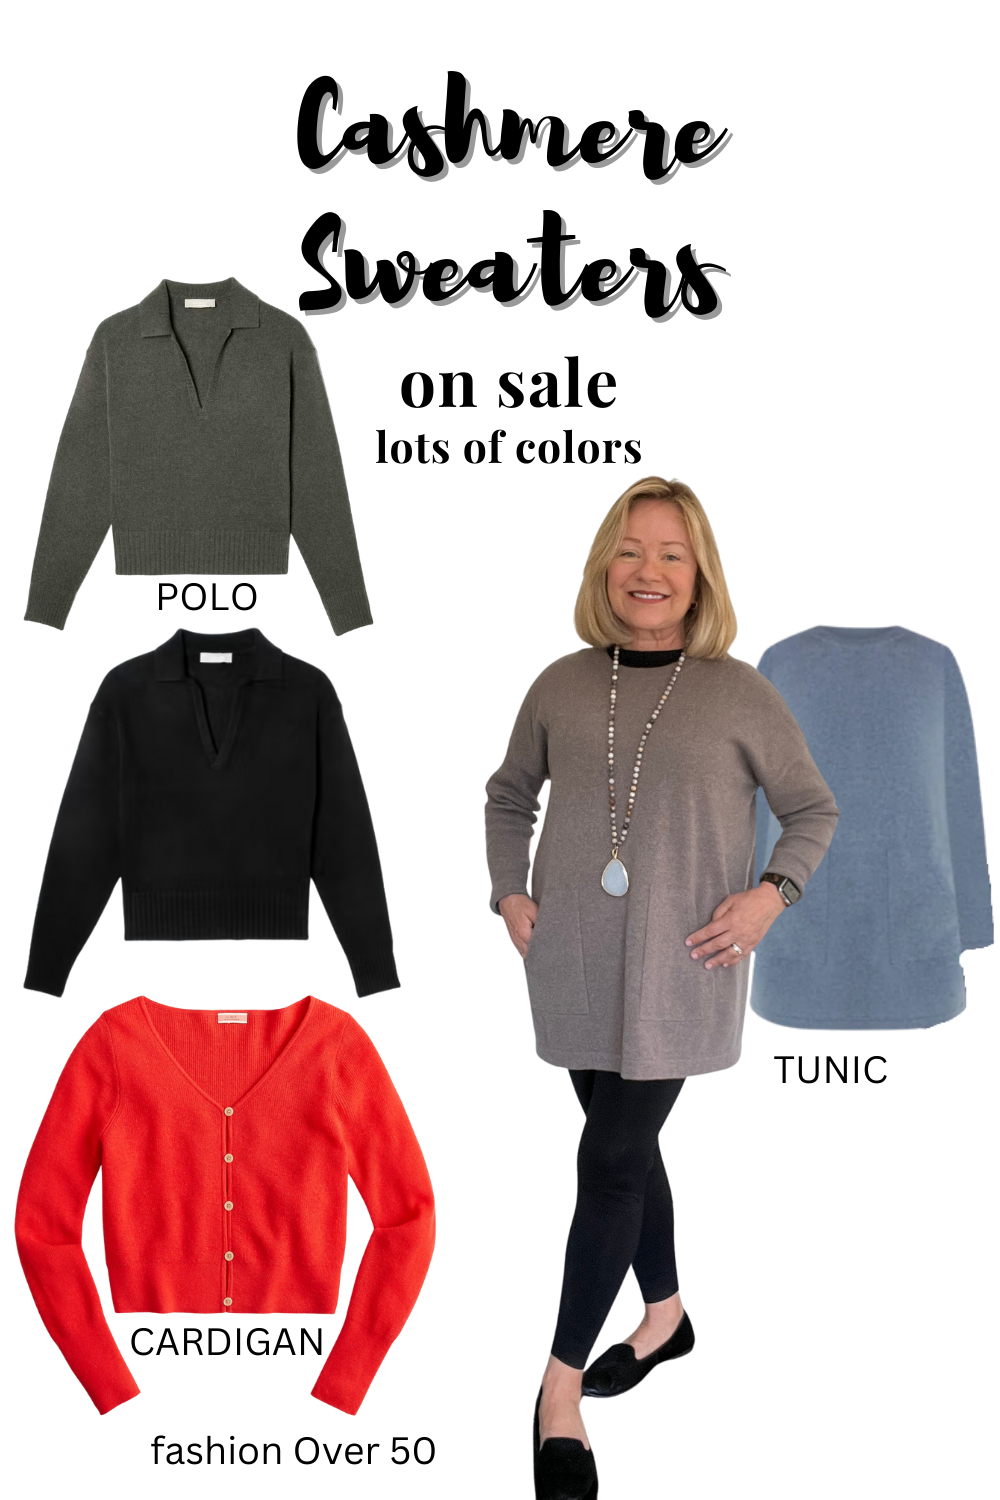  tunics and polos love cashmere sweaters